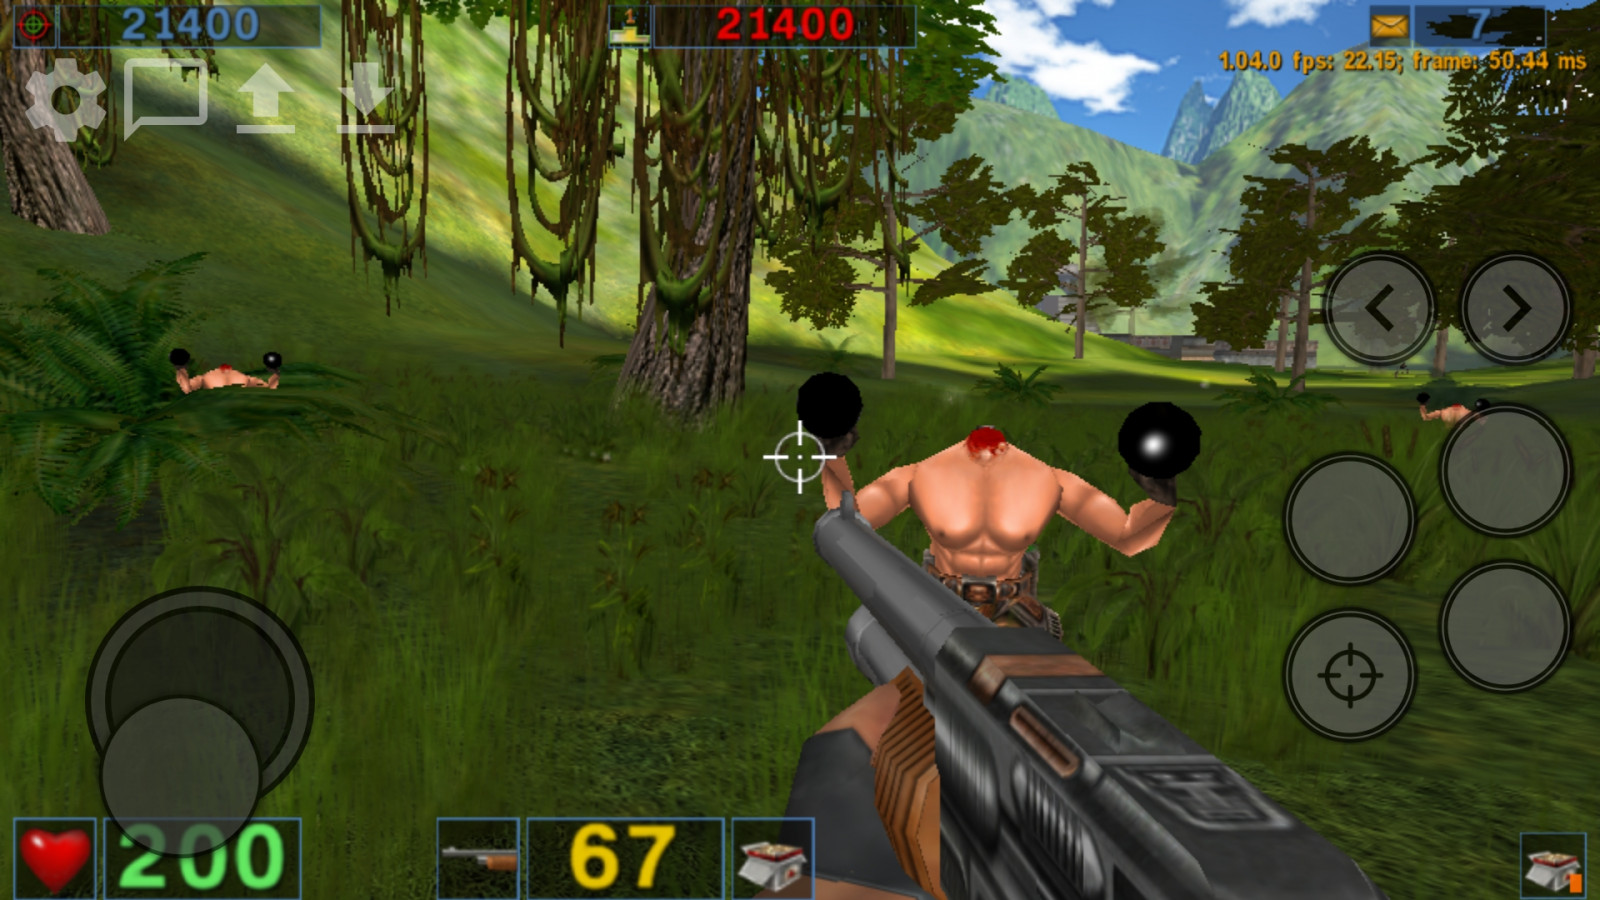 serious sam 1 and 2 pc download